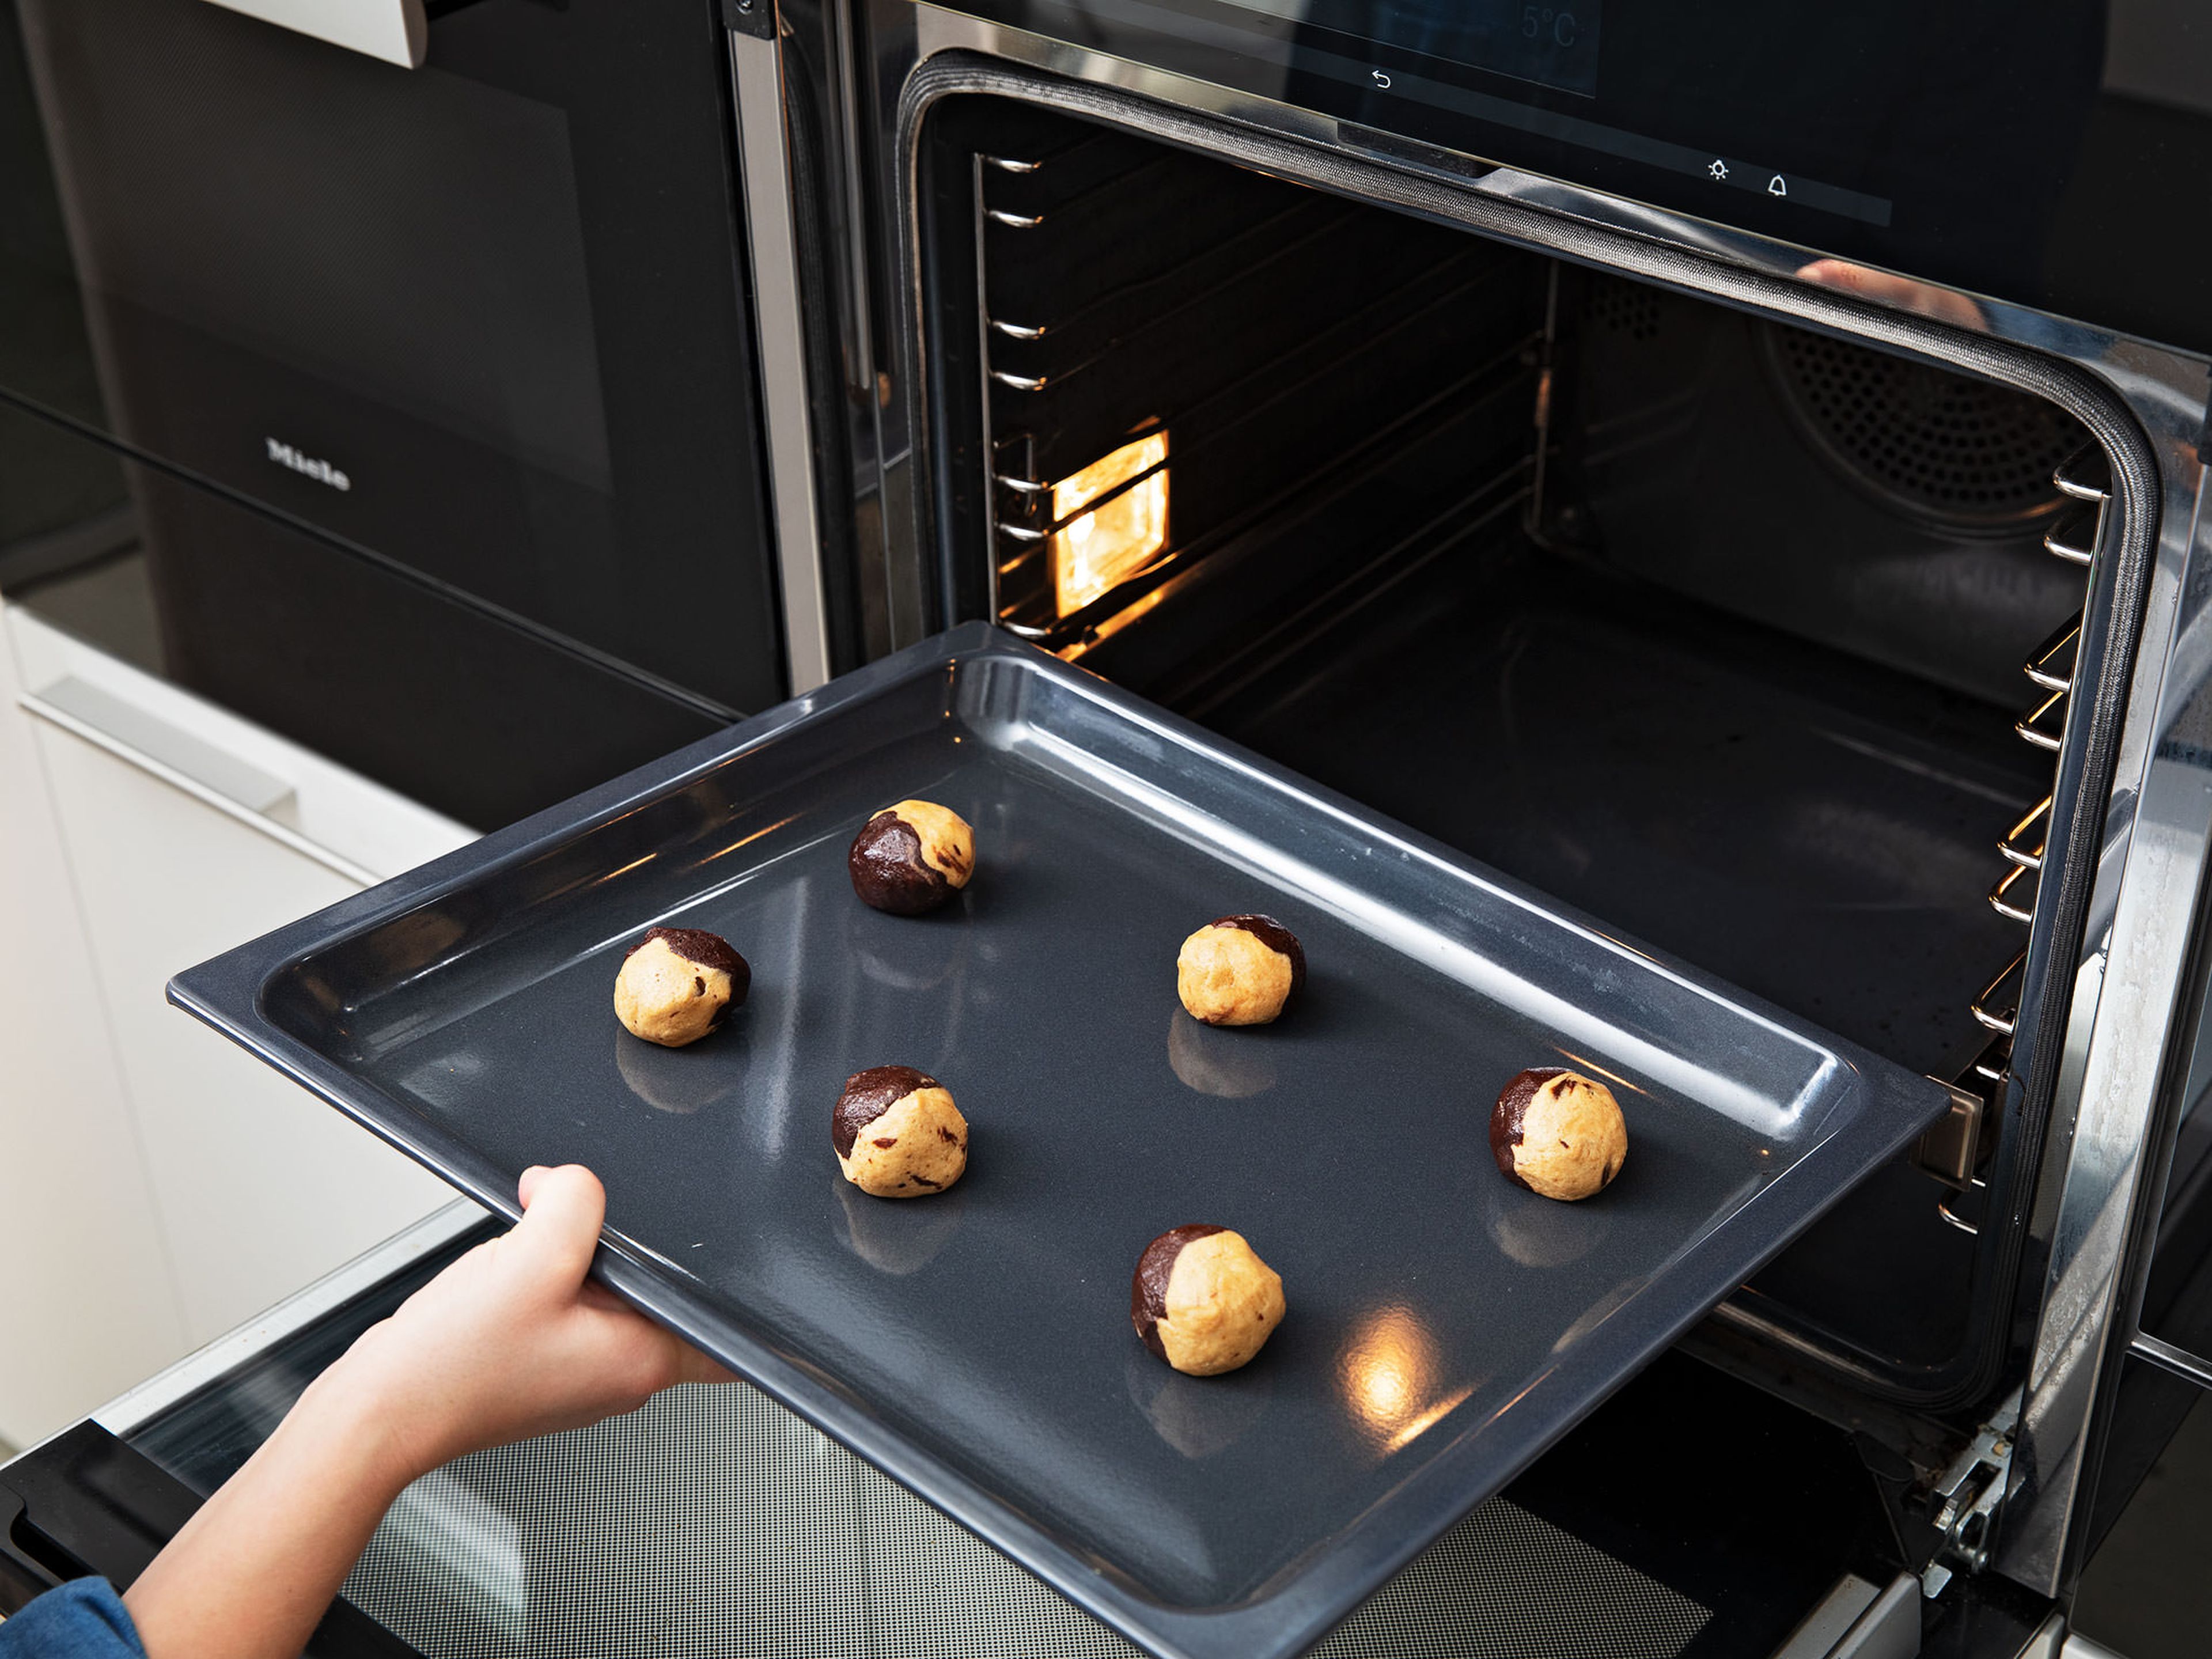 Bake cookies at 175°C/350°F  for approx. 11 – 12 min. Don’t worry, if they are still soft and don’t look done, this is the perfect time to remove them from the oven. Let them cool down on the baking sheet to firm up. Enjoy!